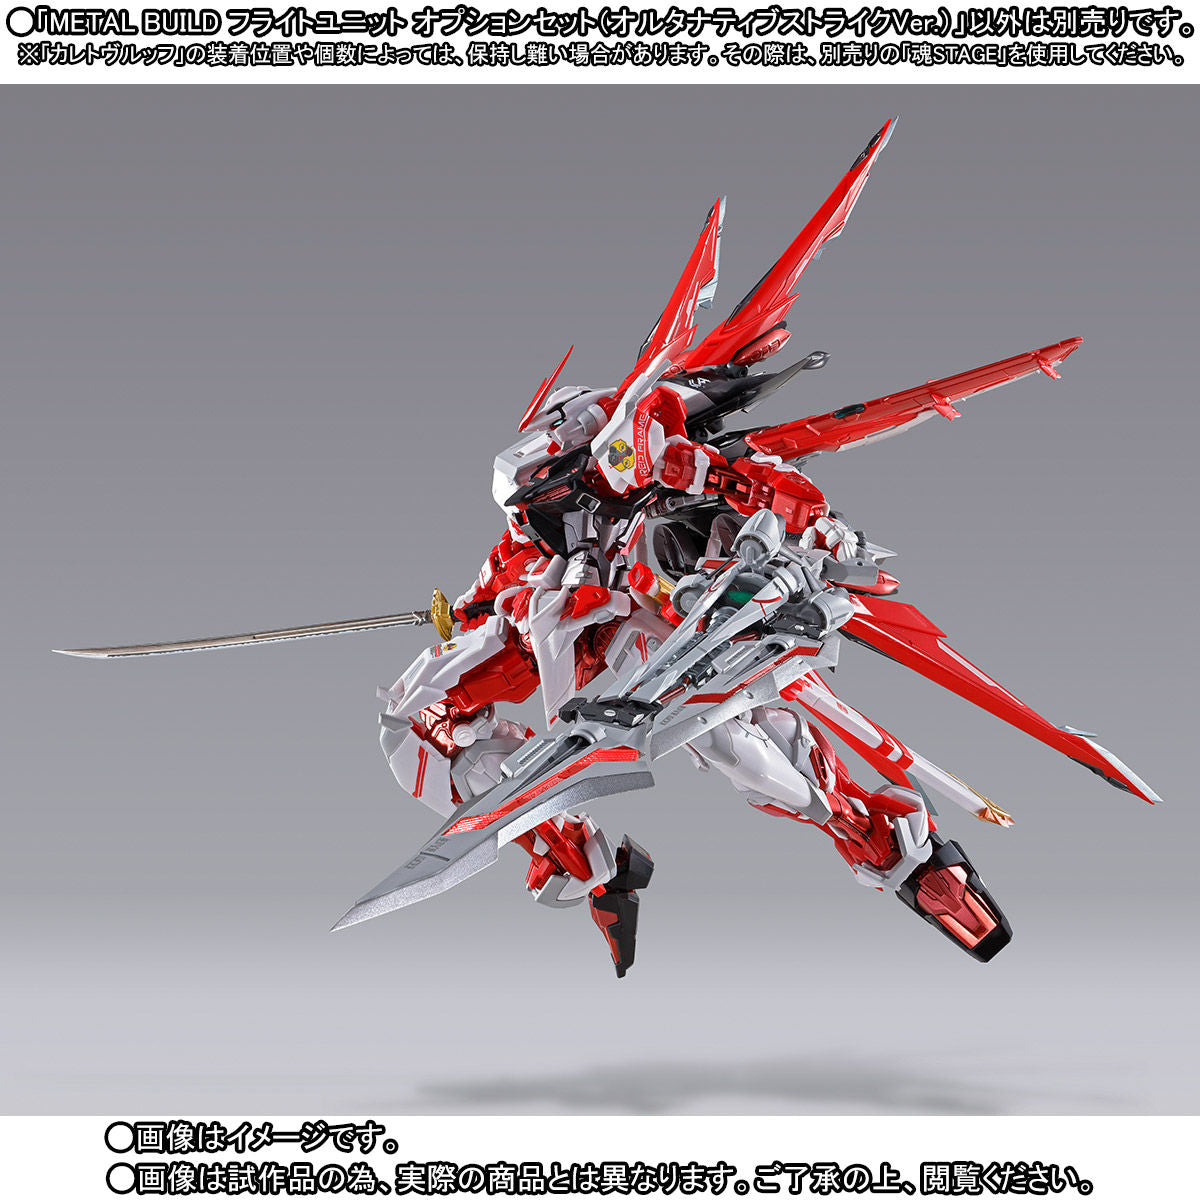 P-BANDAI: METAL BUILD FLIGHT UNIT **PARTS ONLY** [End of January 2020]